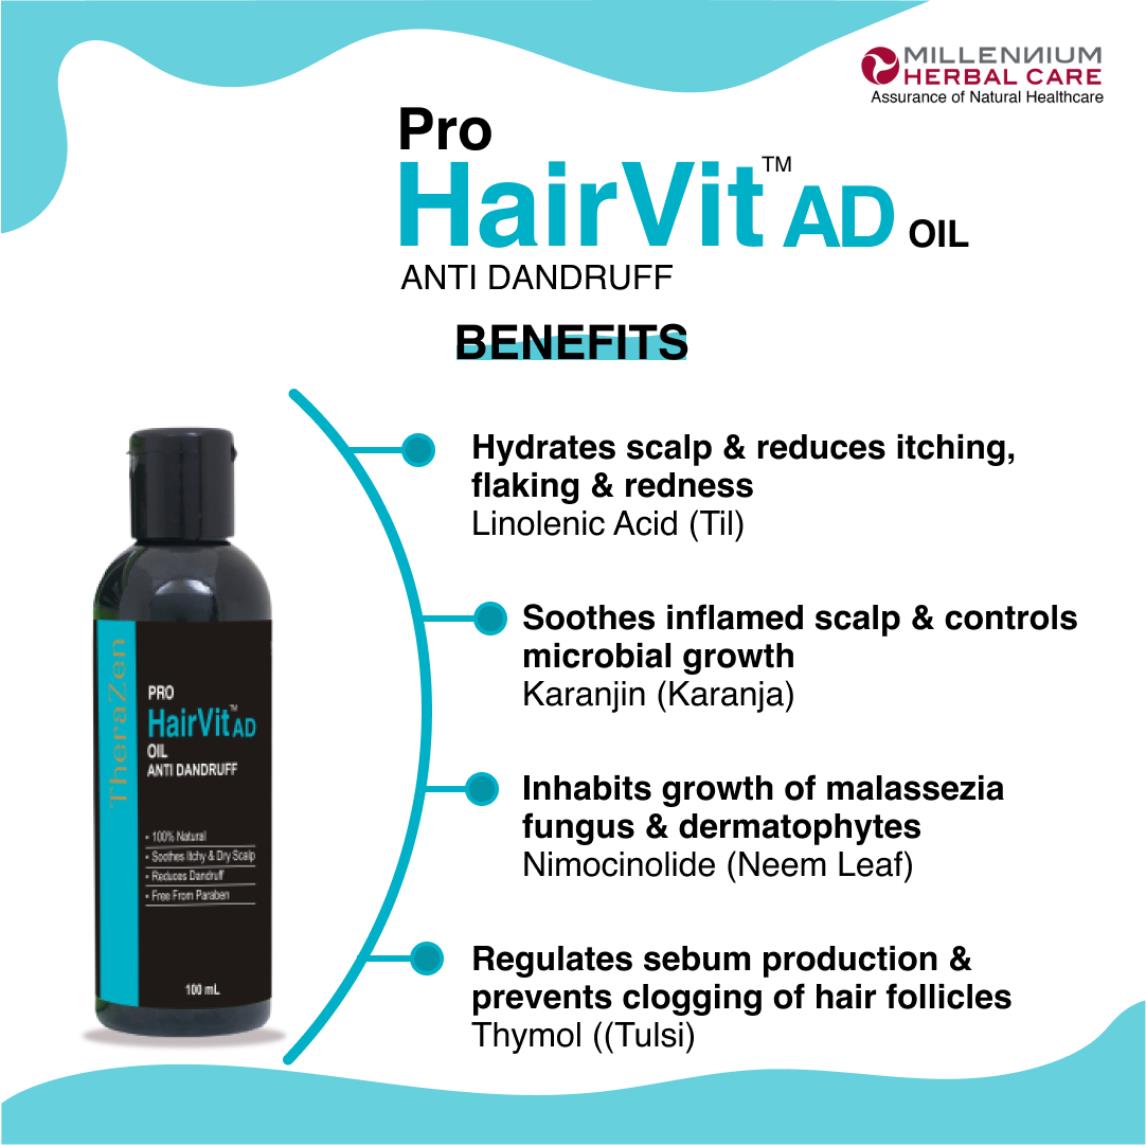 Benefits of Pro Hair AD Oil